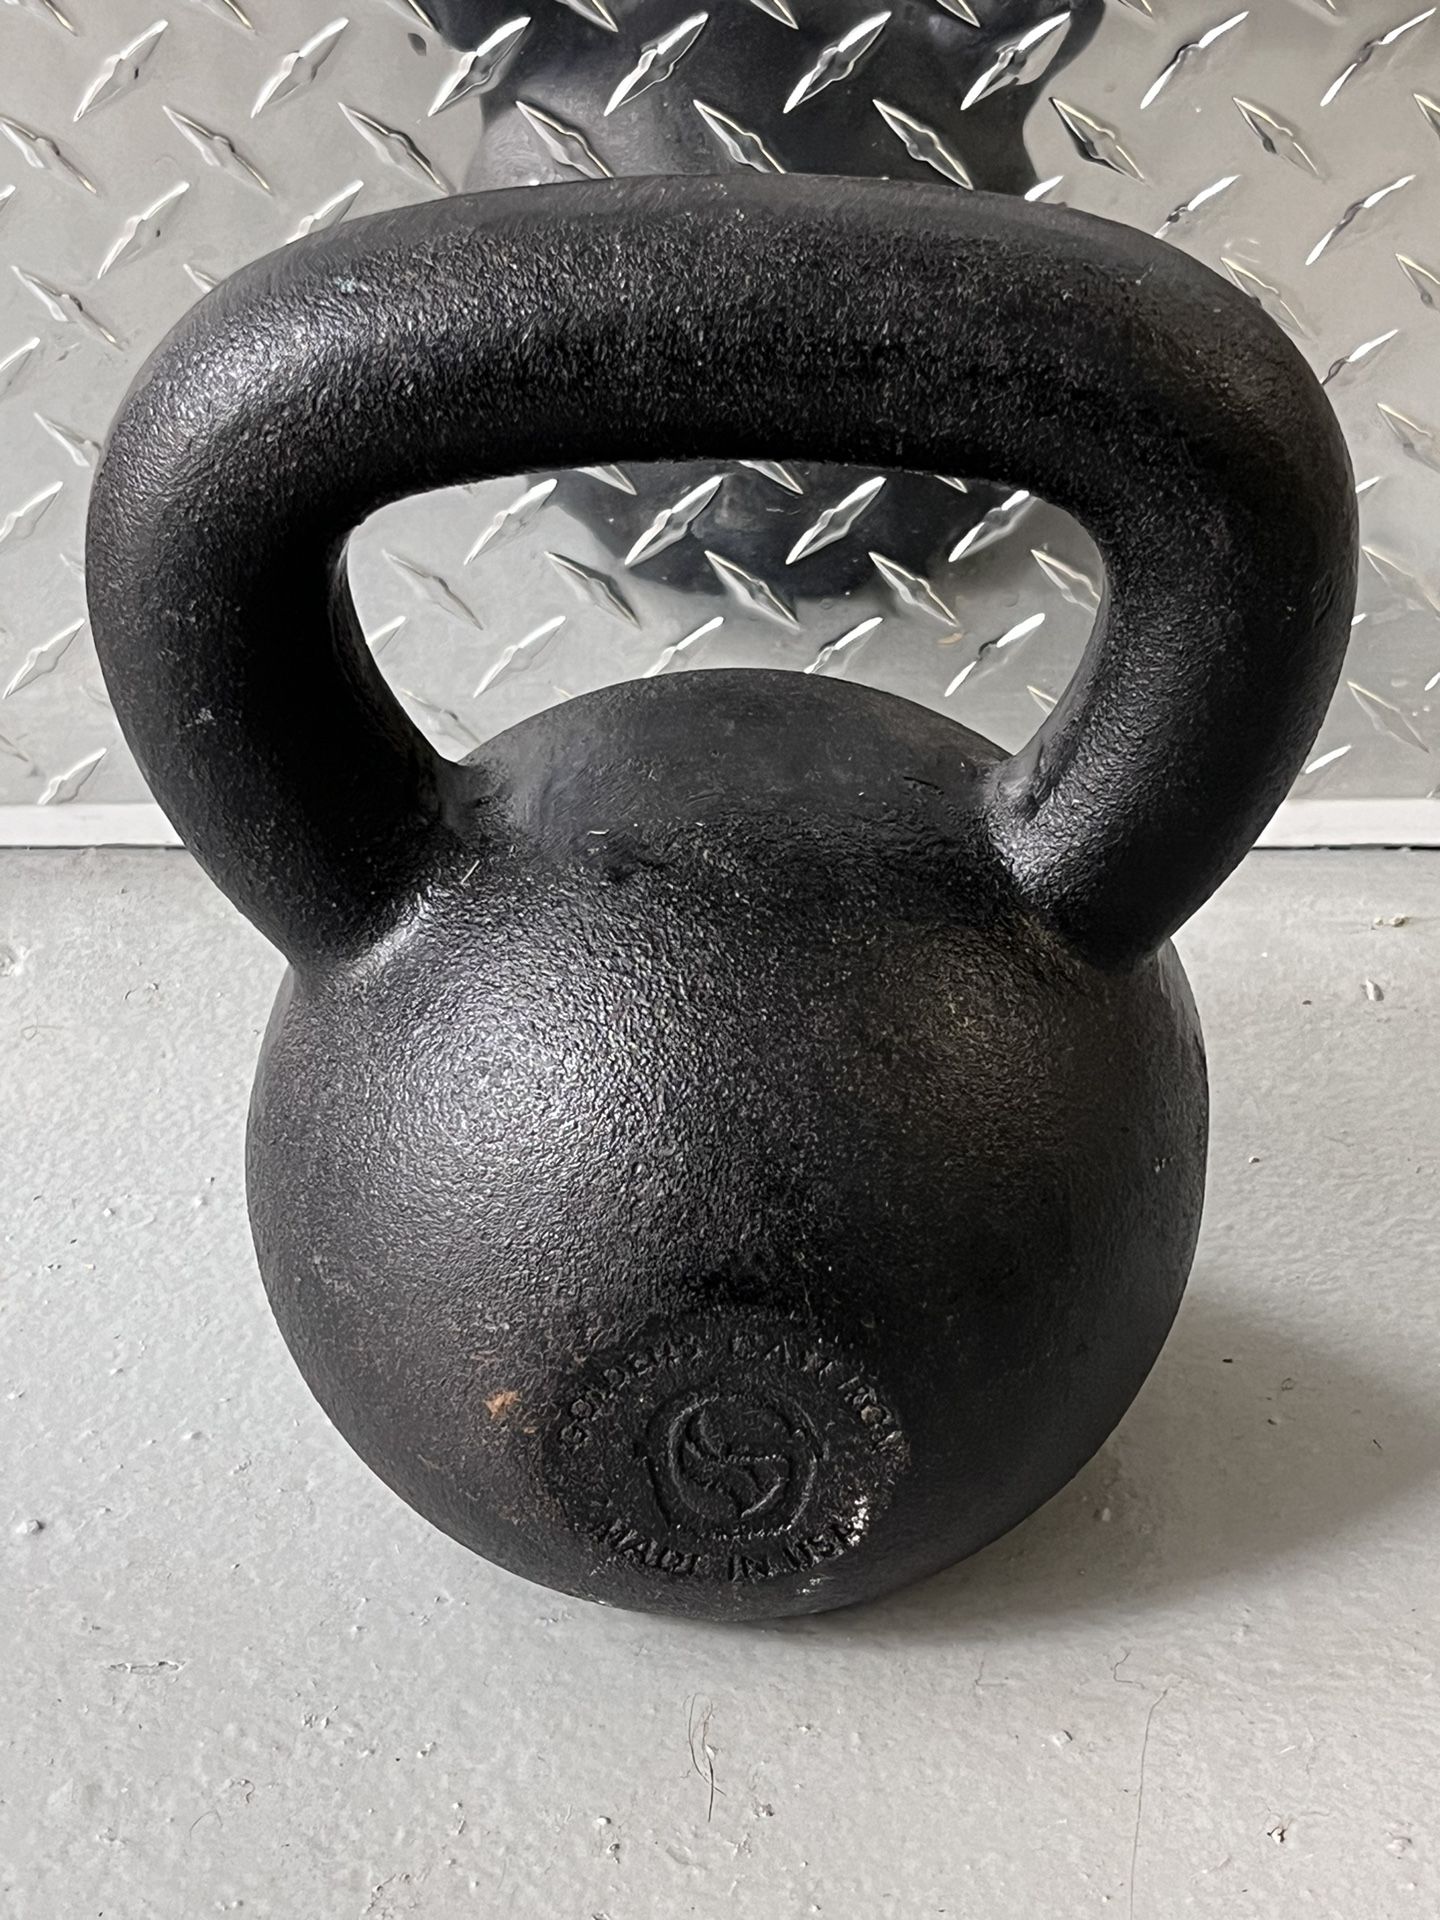 44 Lb (20KG) Kettlebell Weight Workout Exercise Gym Fitness - Made In USA